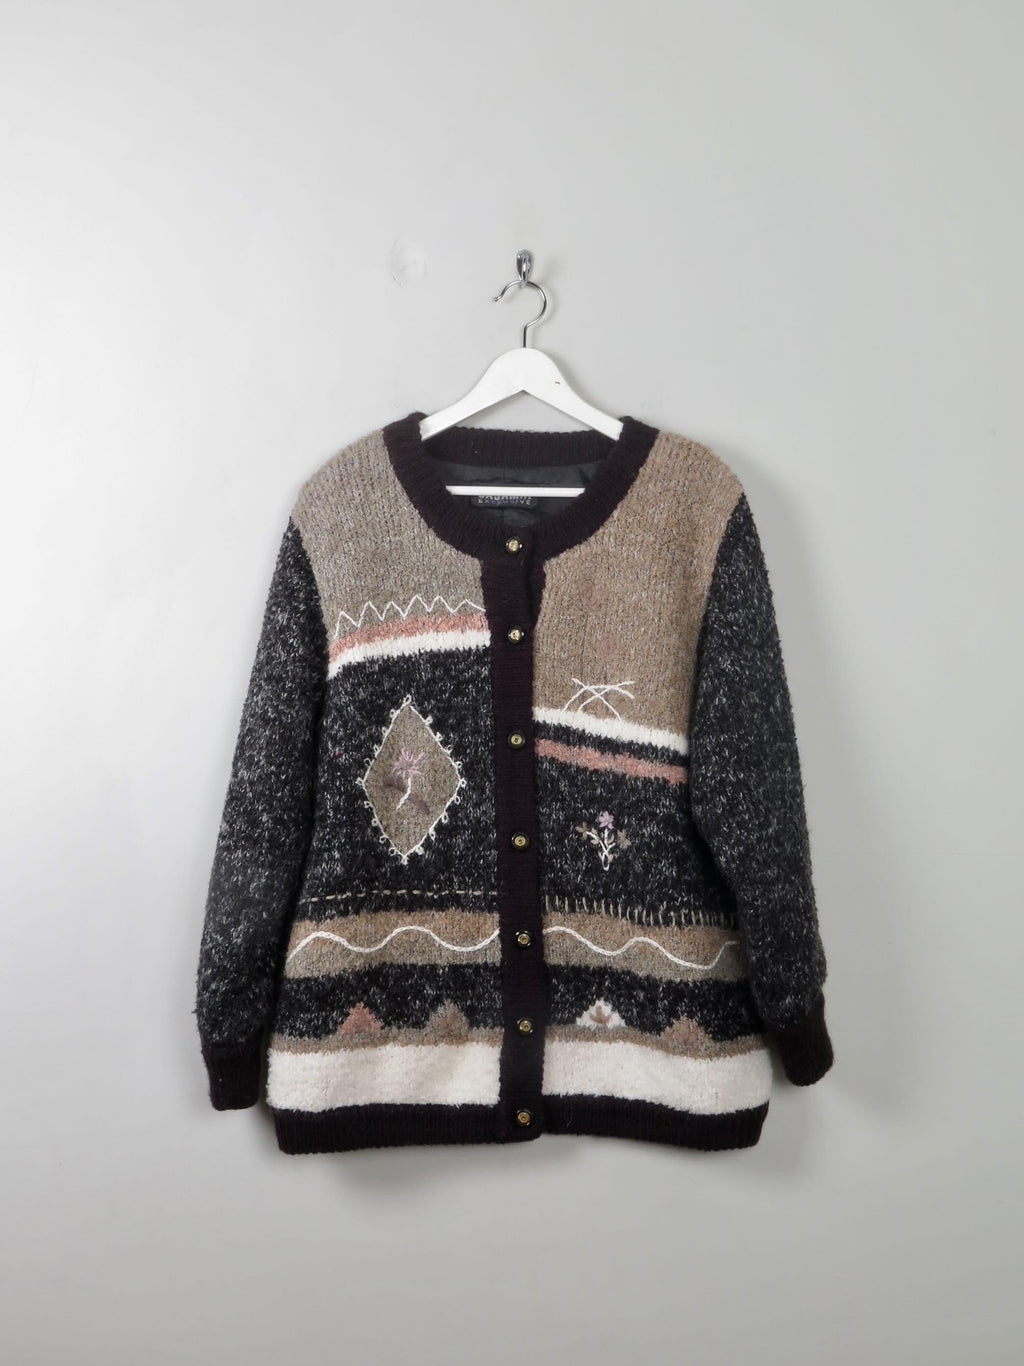 Women's Vintage Lined Wool Cardigan M/L - The Harlequin